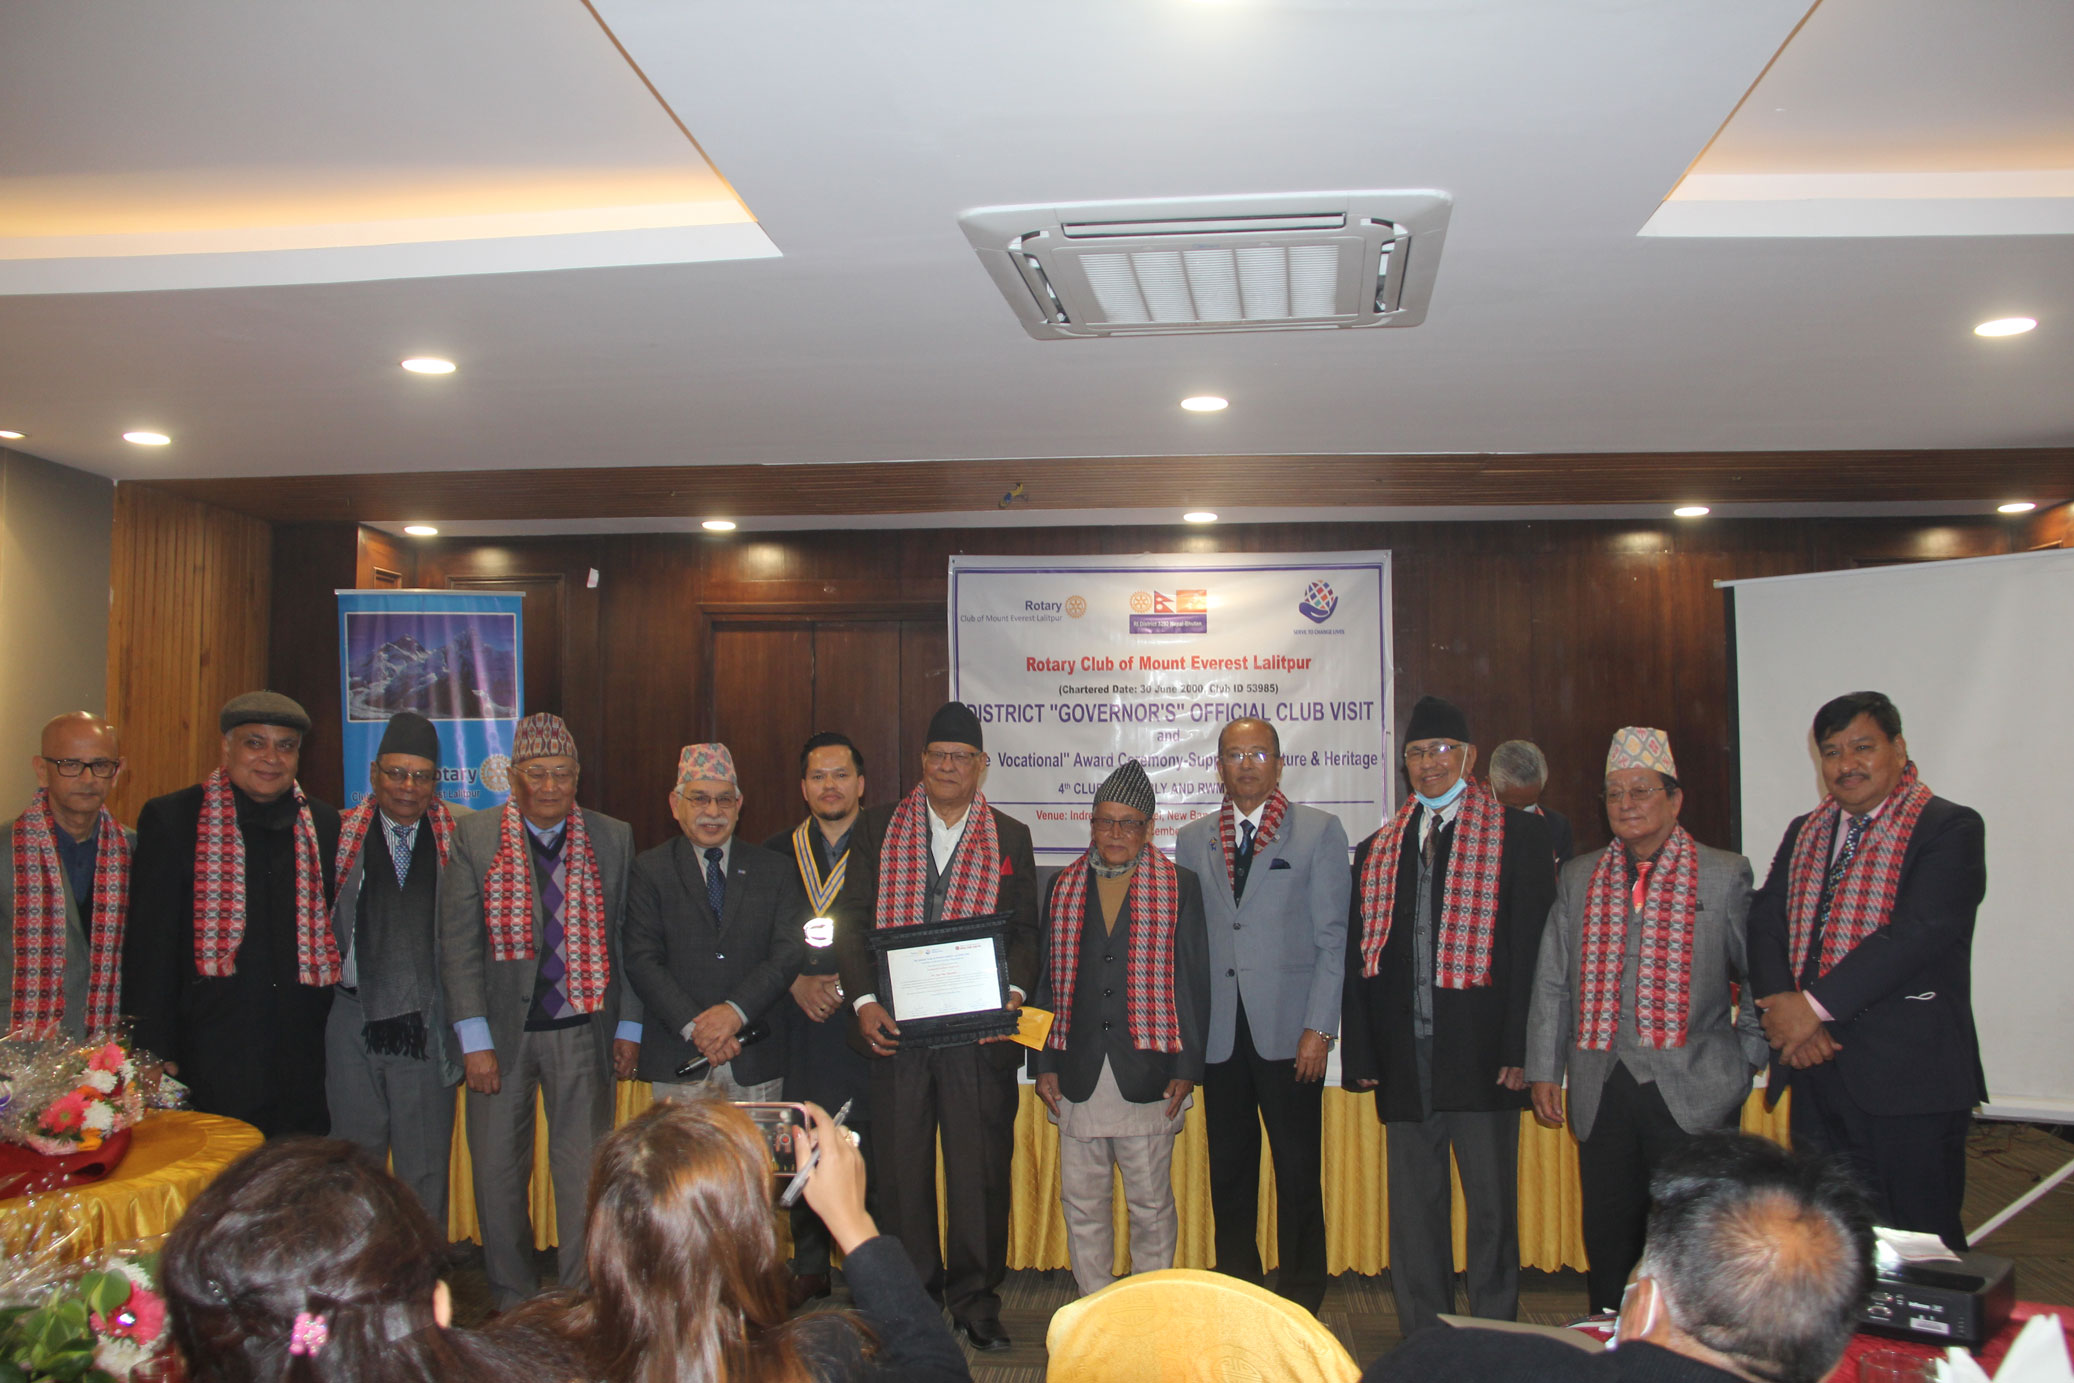 District Governor’s Official Club Visit